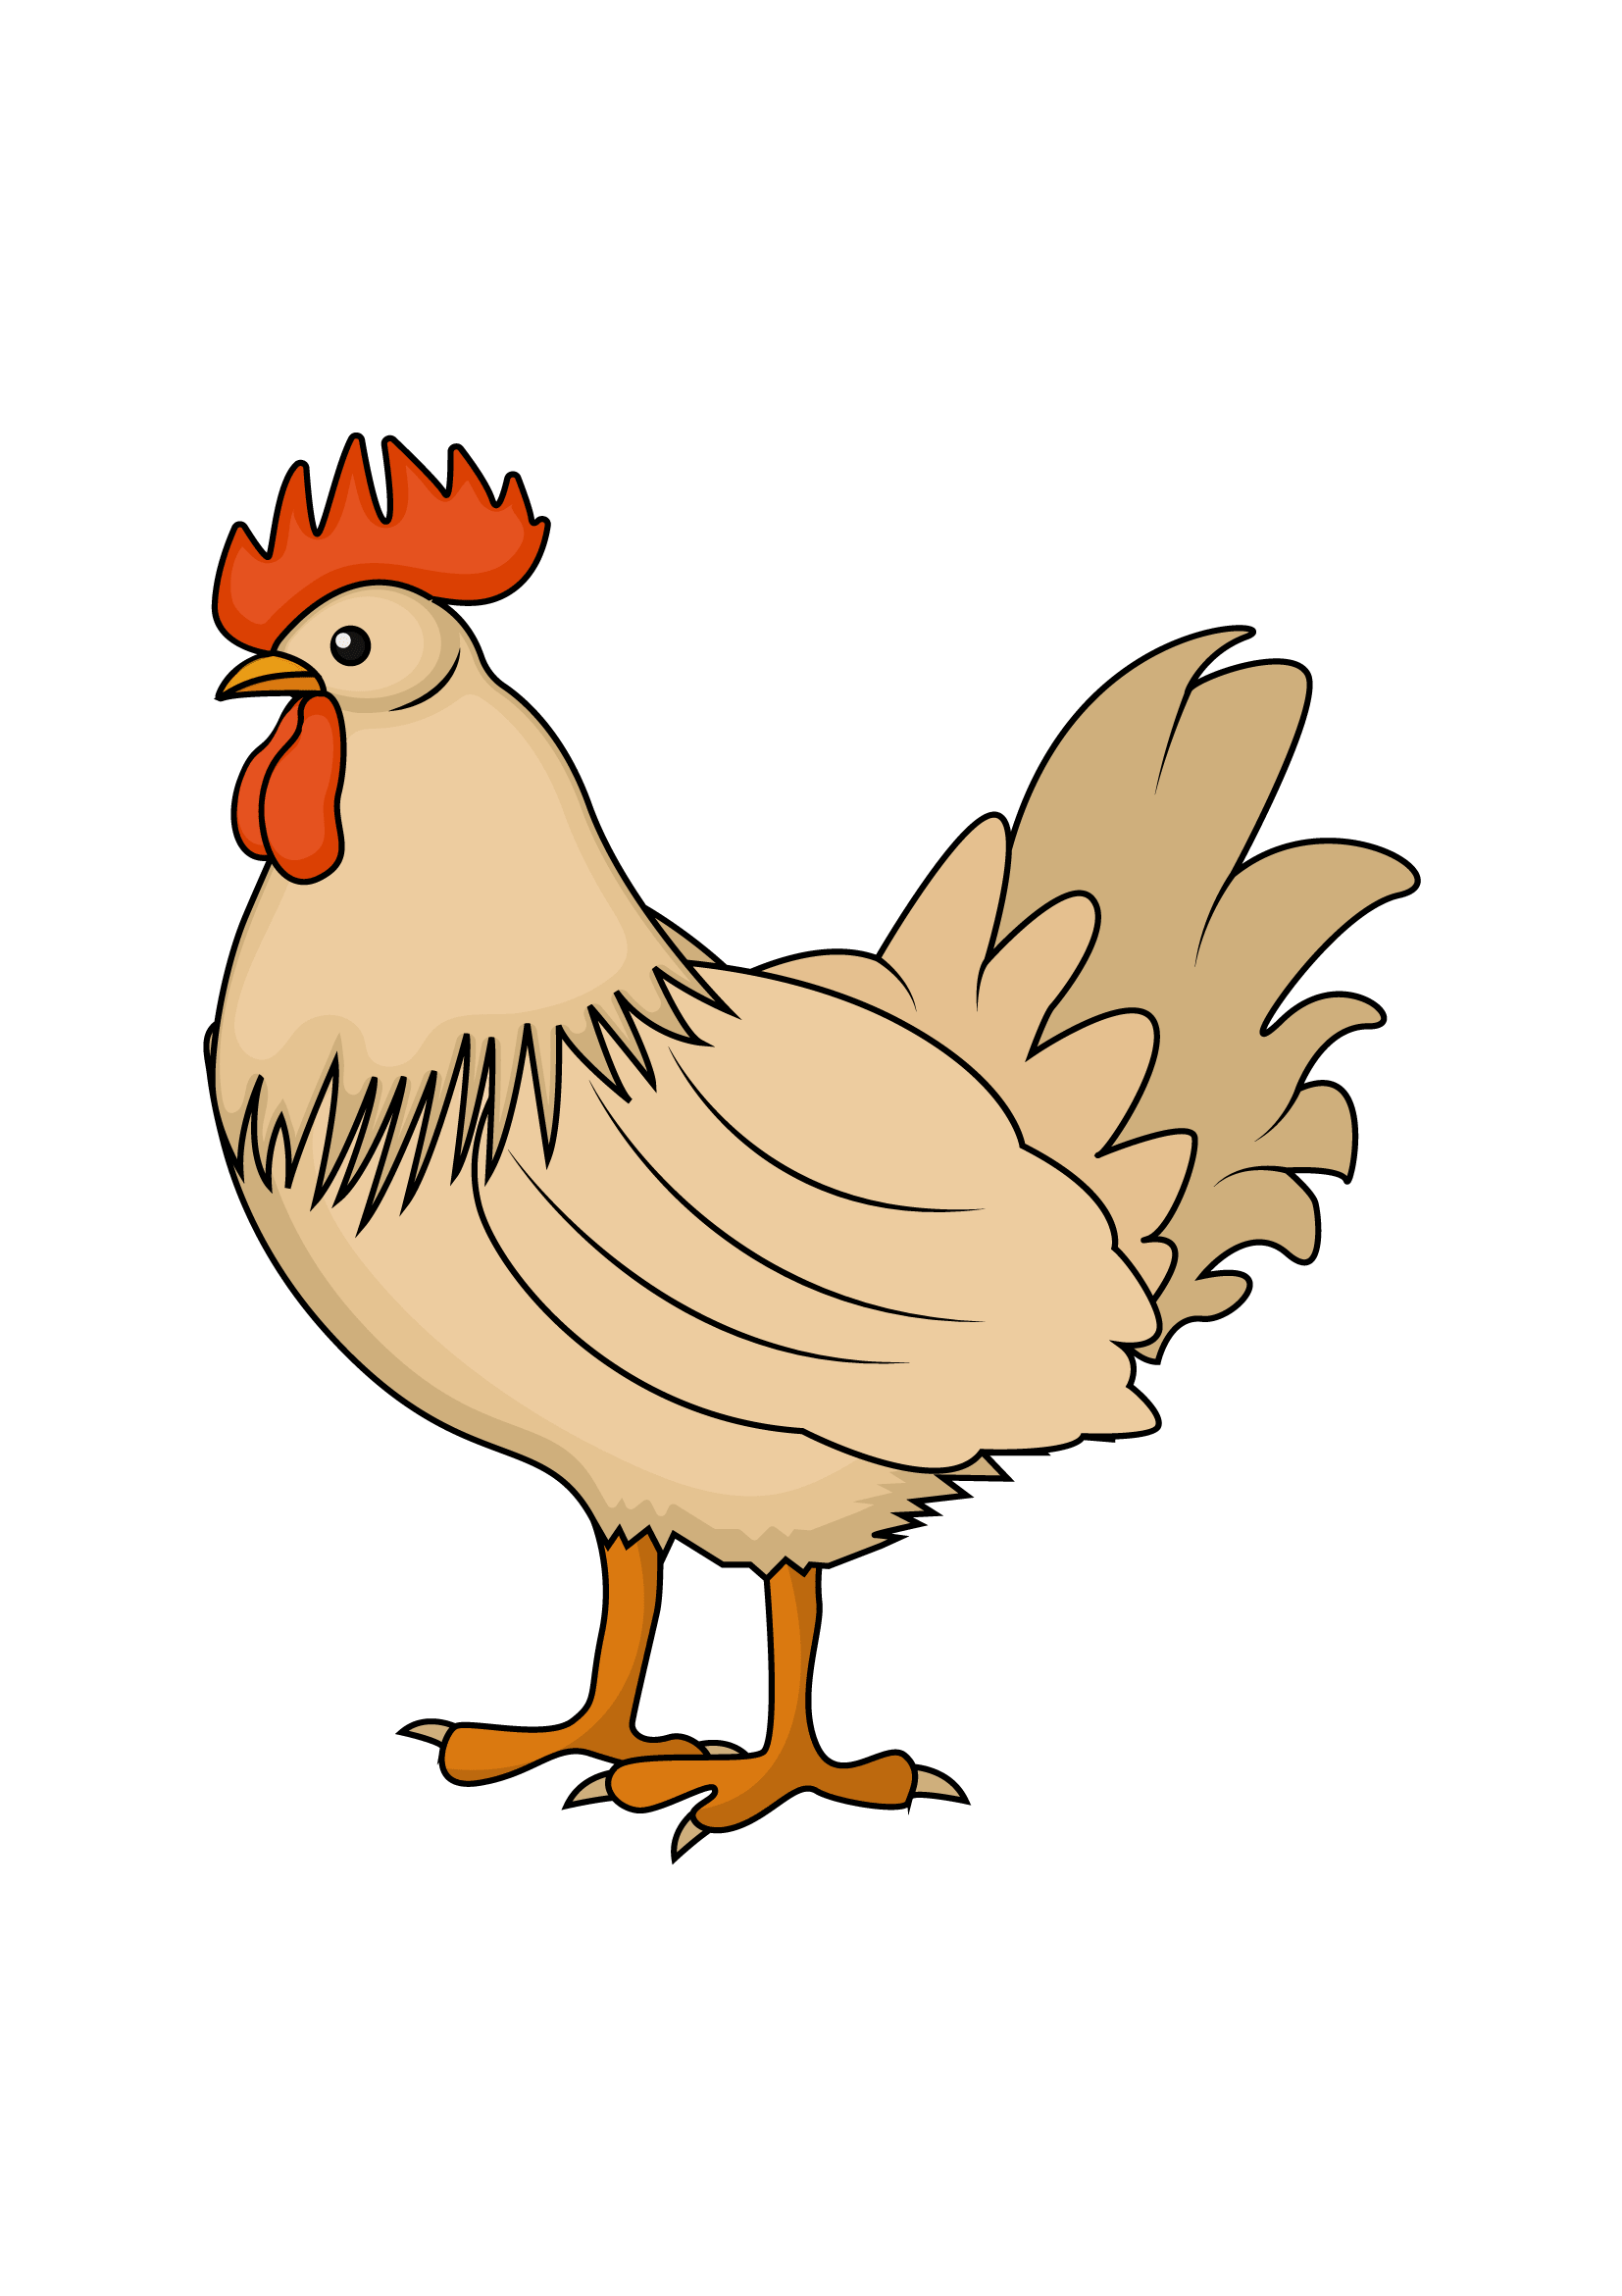 How to Draw A Chicken Step by Step Printable